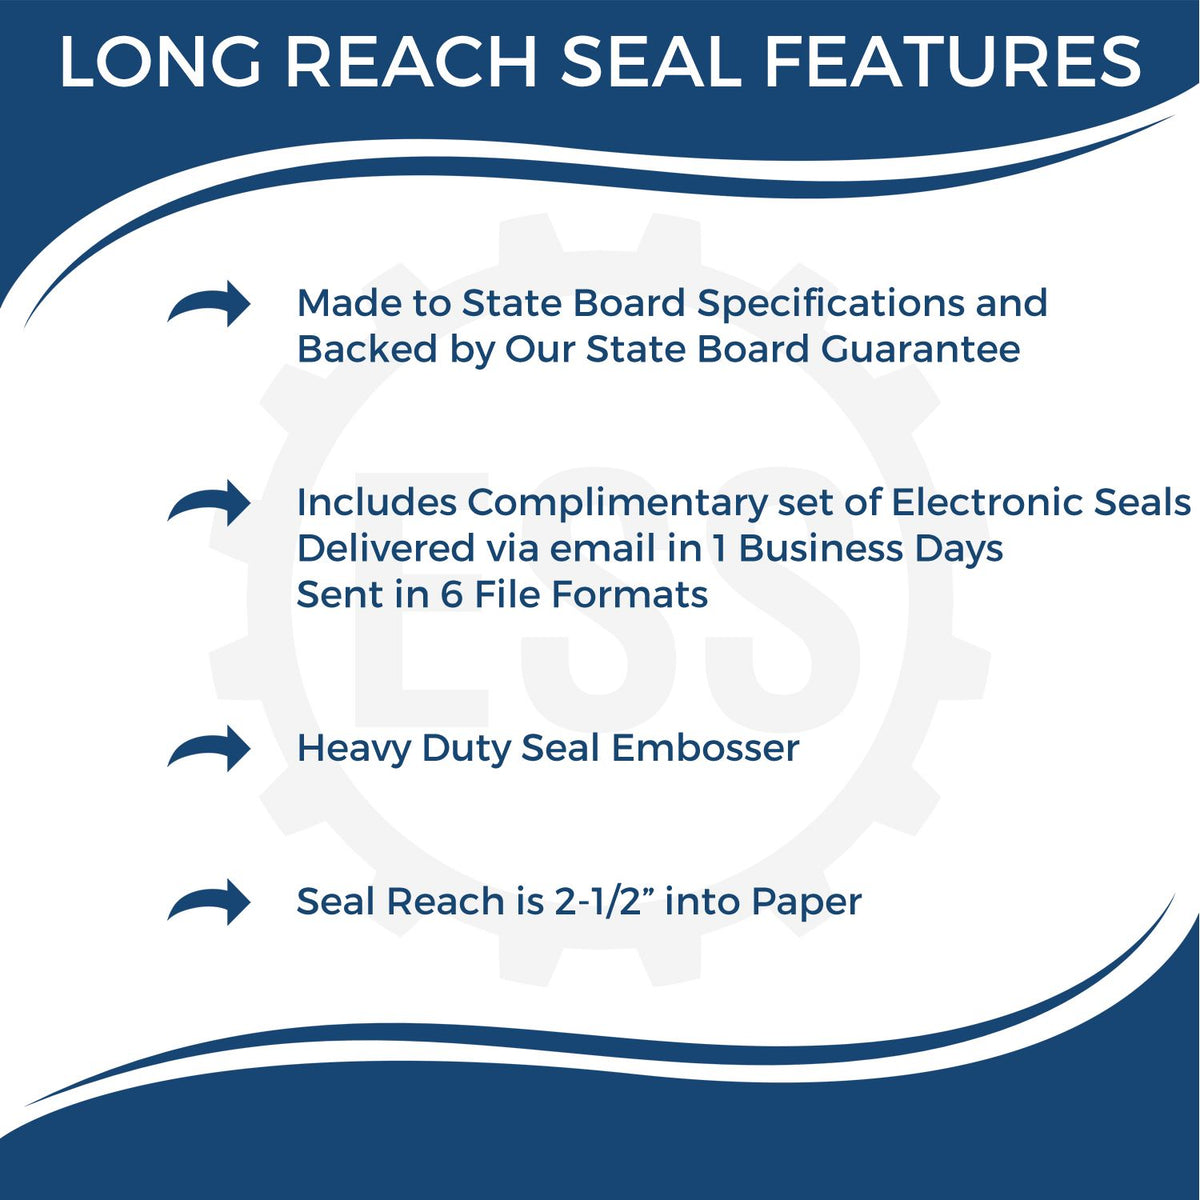 A picture of an infographic highlighting the selling points for the Long Reach Tennessee PE Seal